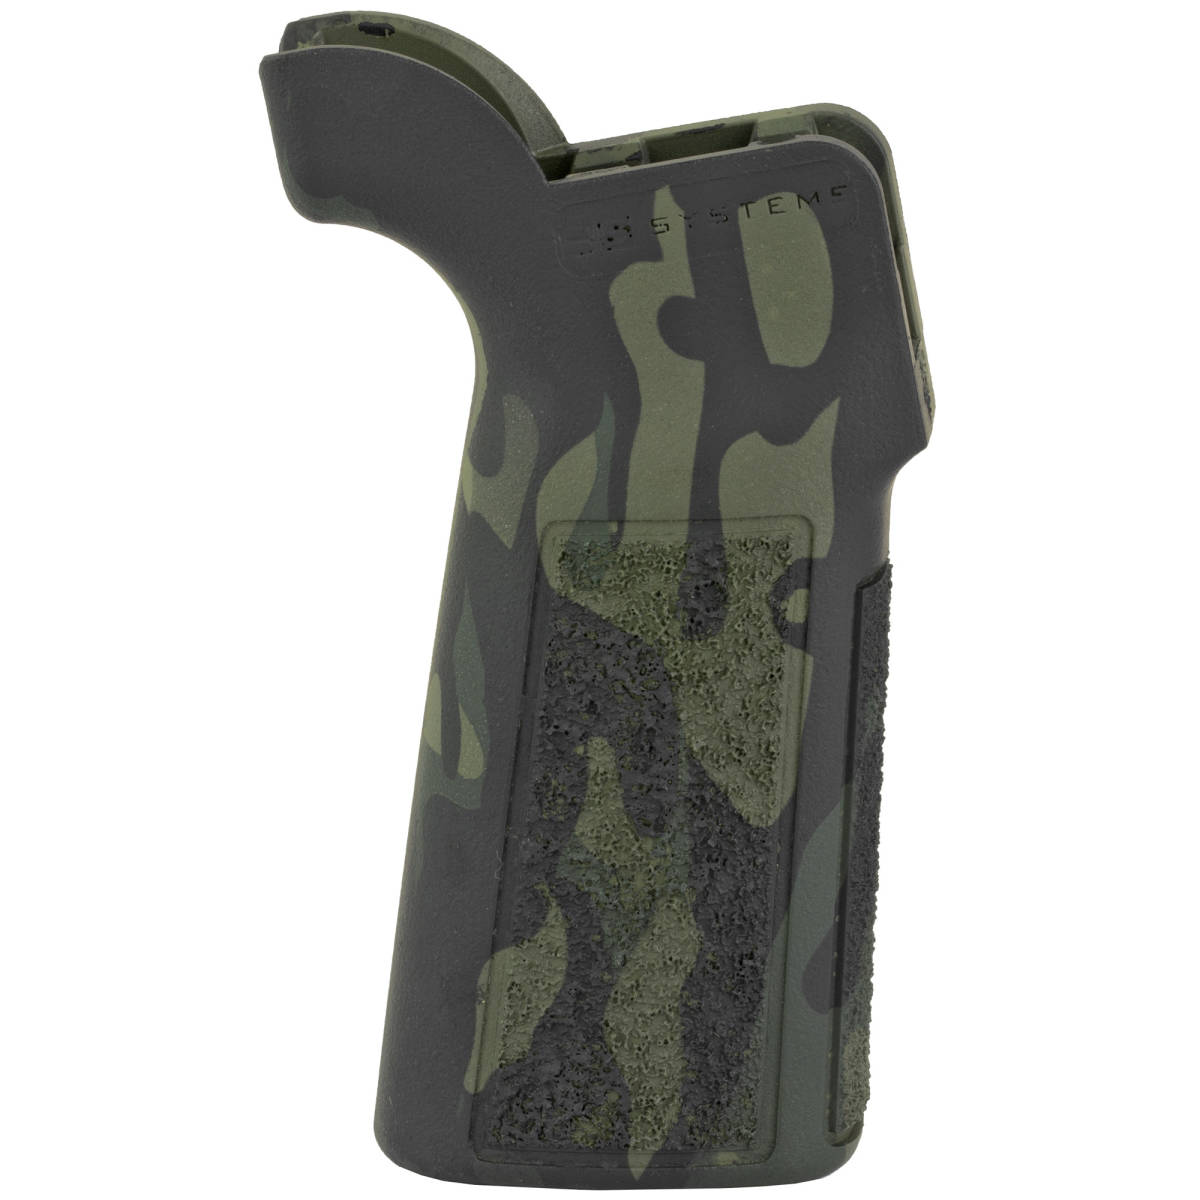 B5 Systems PGR1426 Type 23 P-Grip Black Multi-Cam Polymer, Aggressive...-img-1